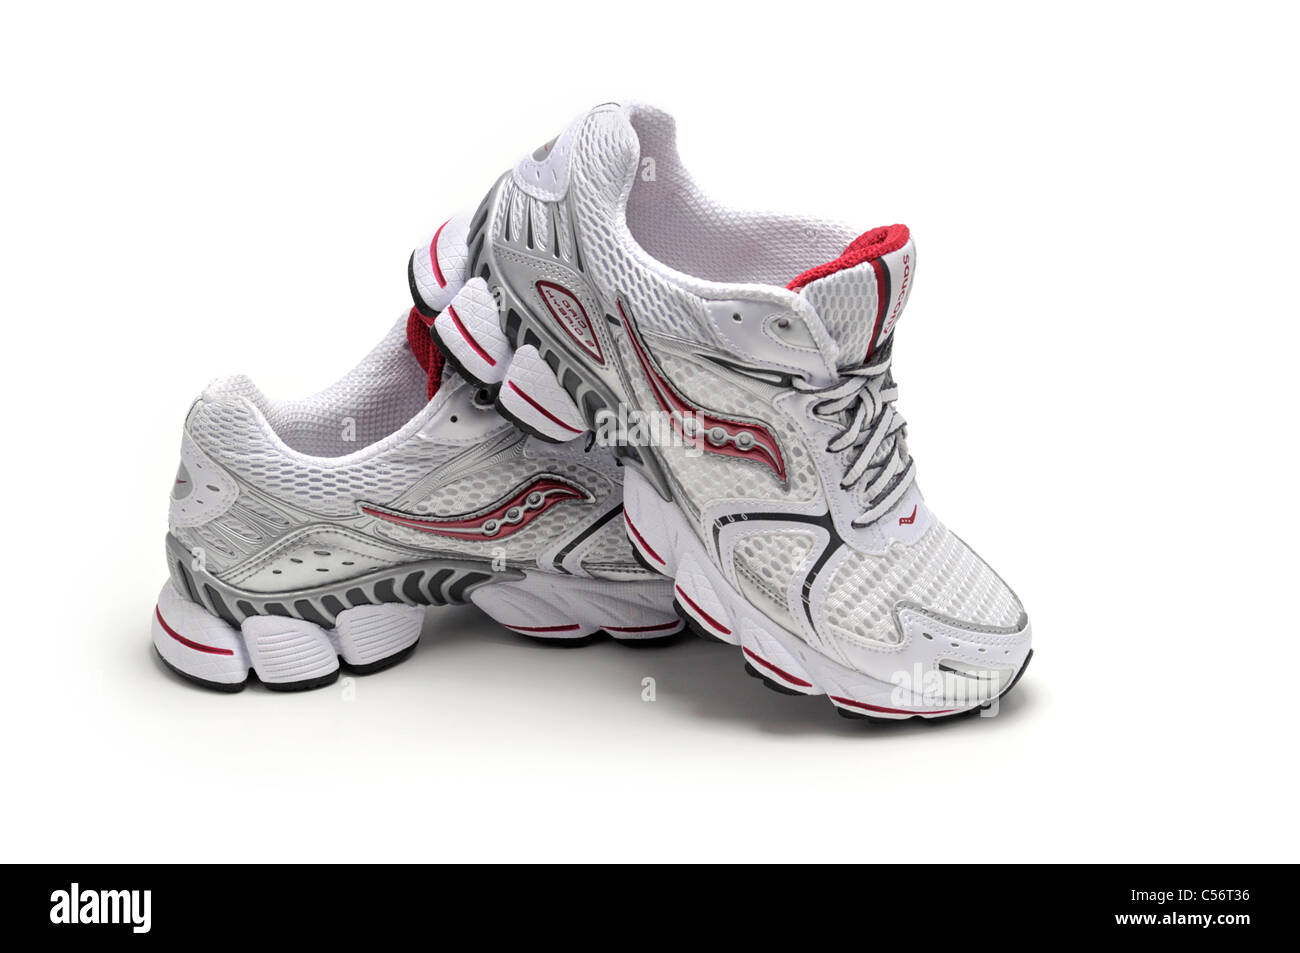 Trainers Sneakers Runners, Running Shoes Stock Photo